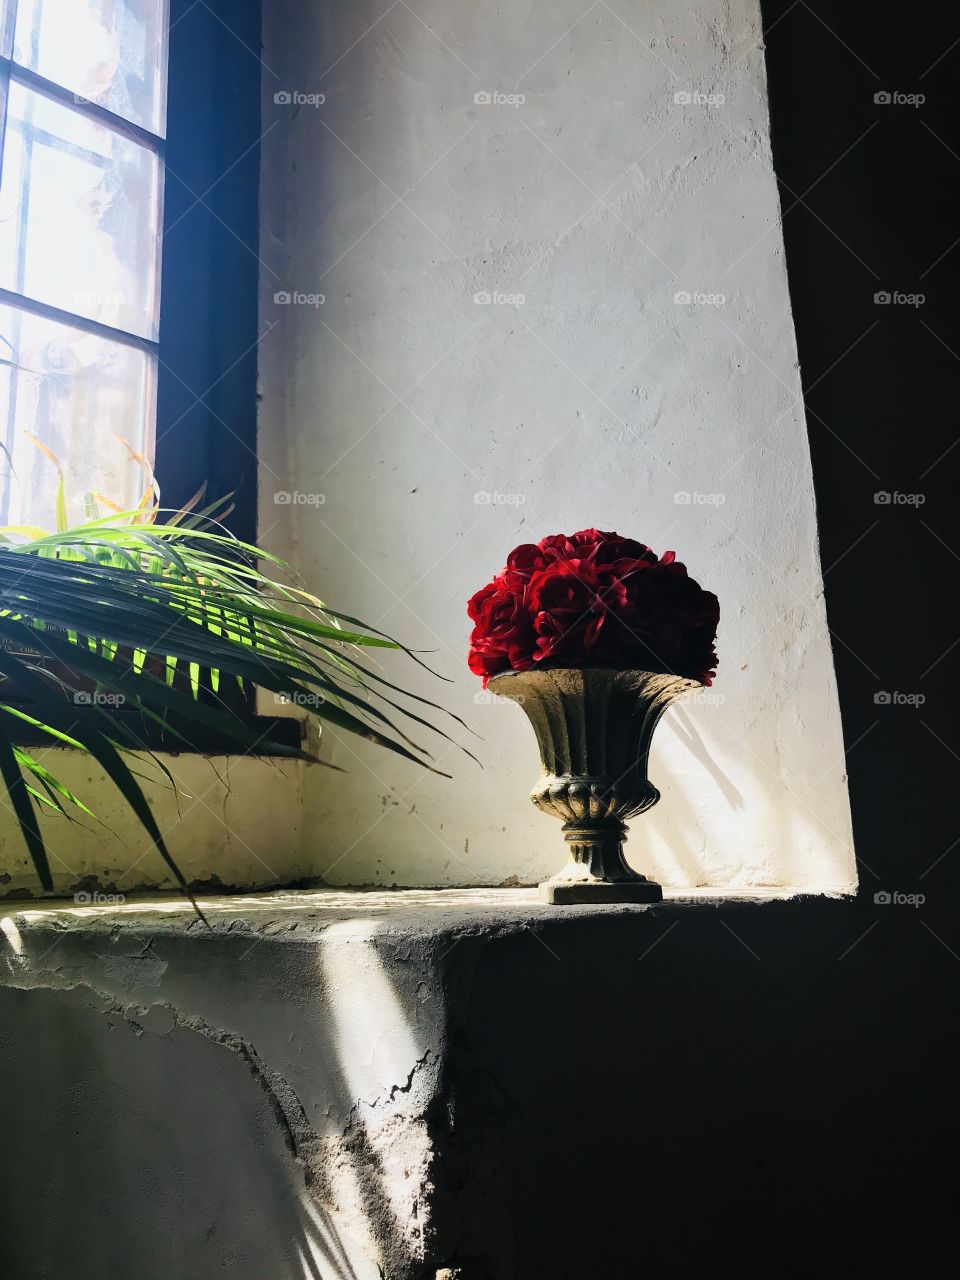 Bouquet of roses left in a church.